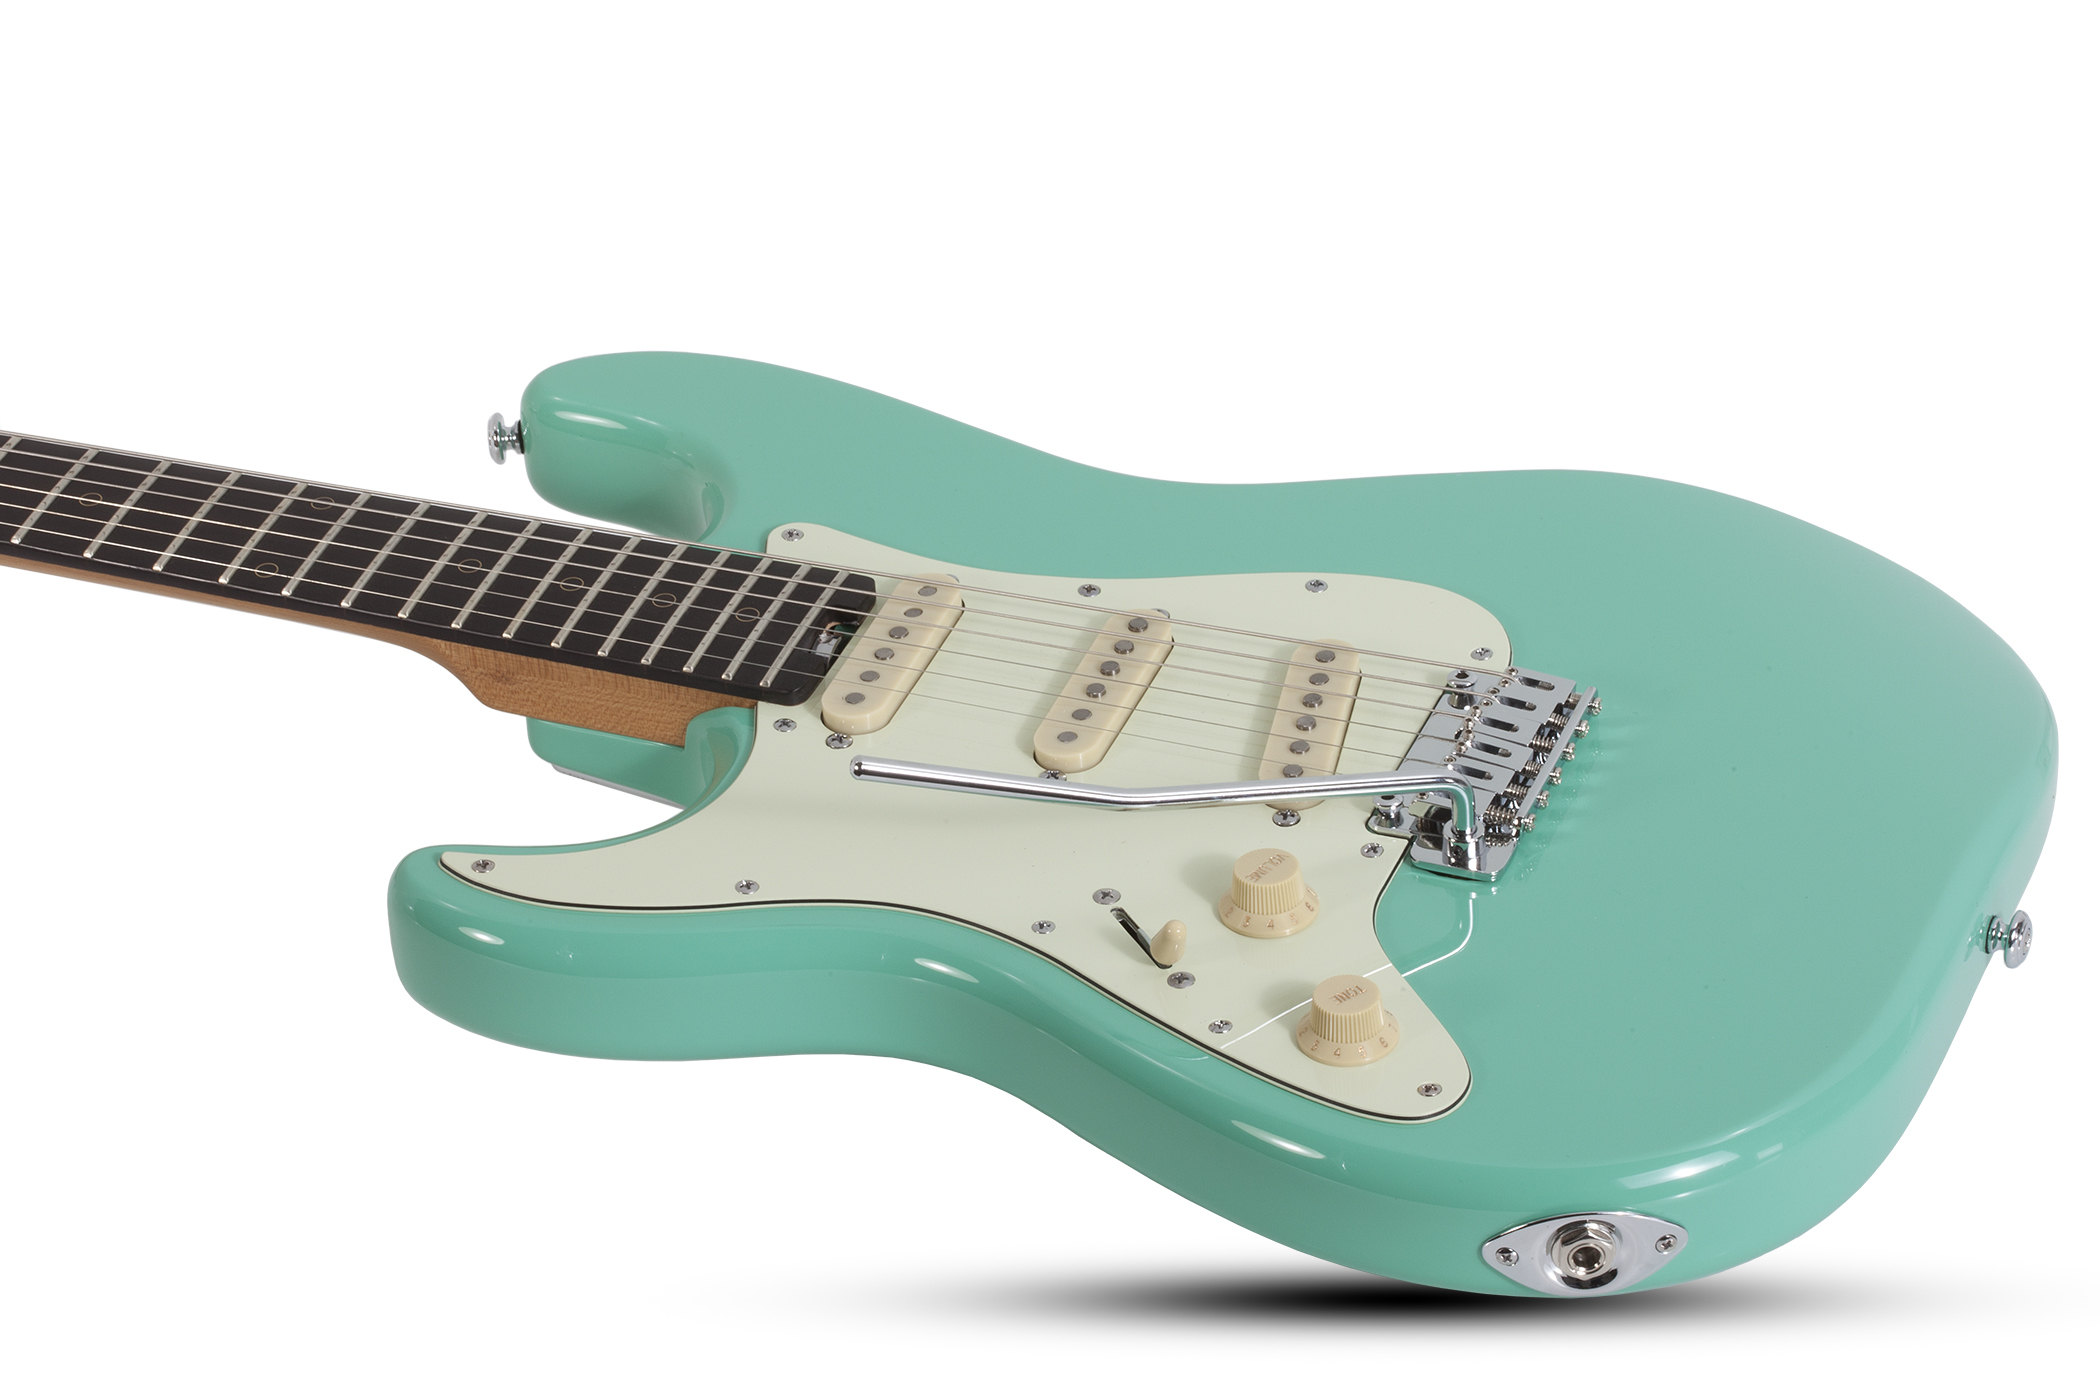 Schecter Nick Johnston Traditional Gaucher Signature 3s Trem Eb - Atomic Green - Left-handed electric guitar - Variation 1